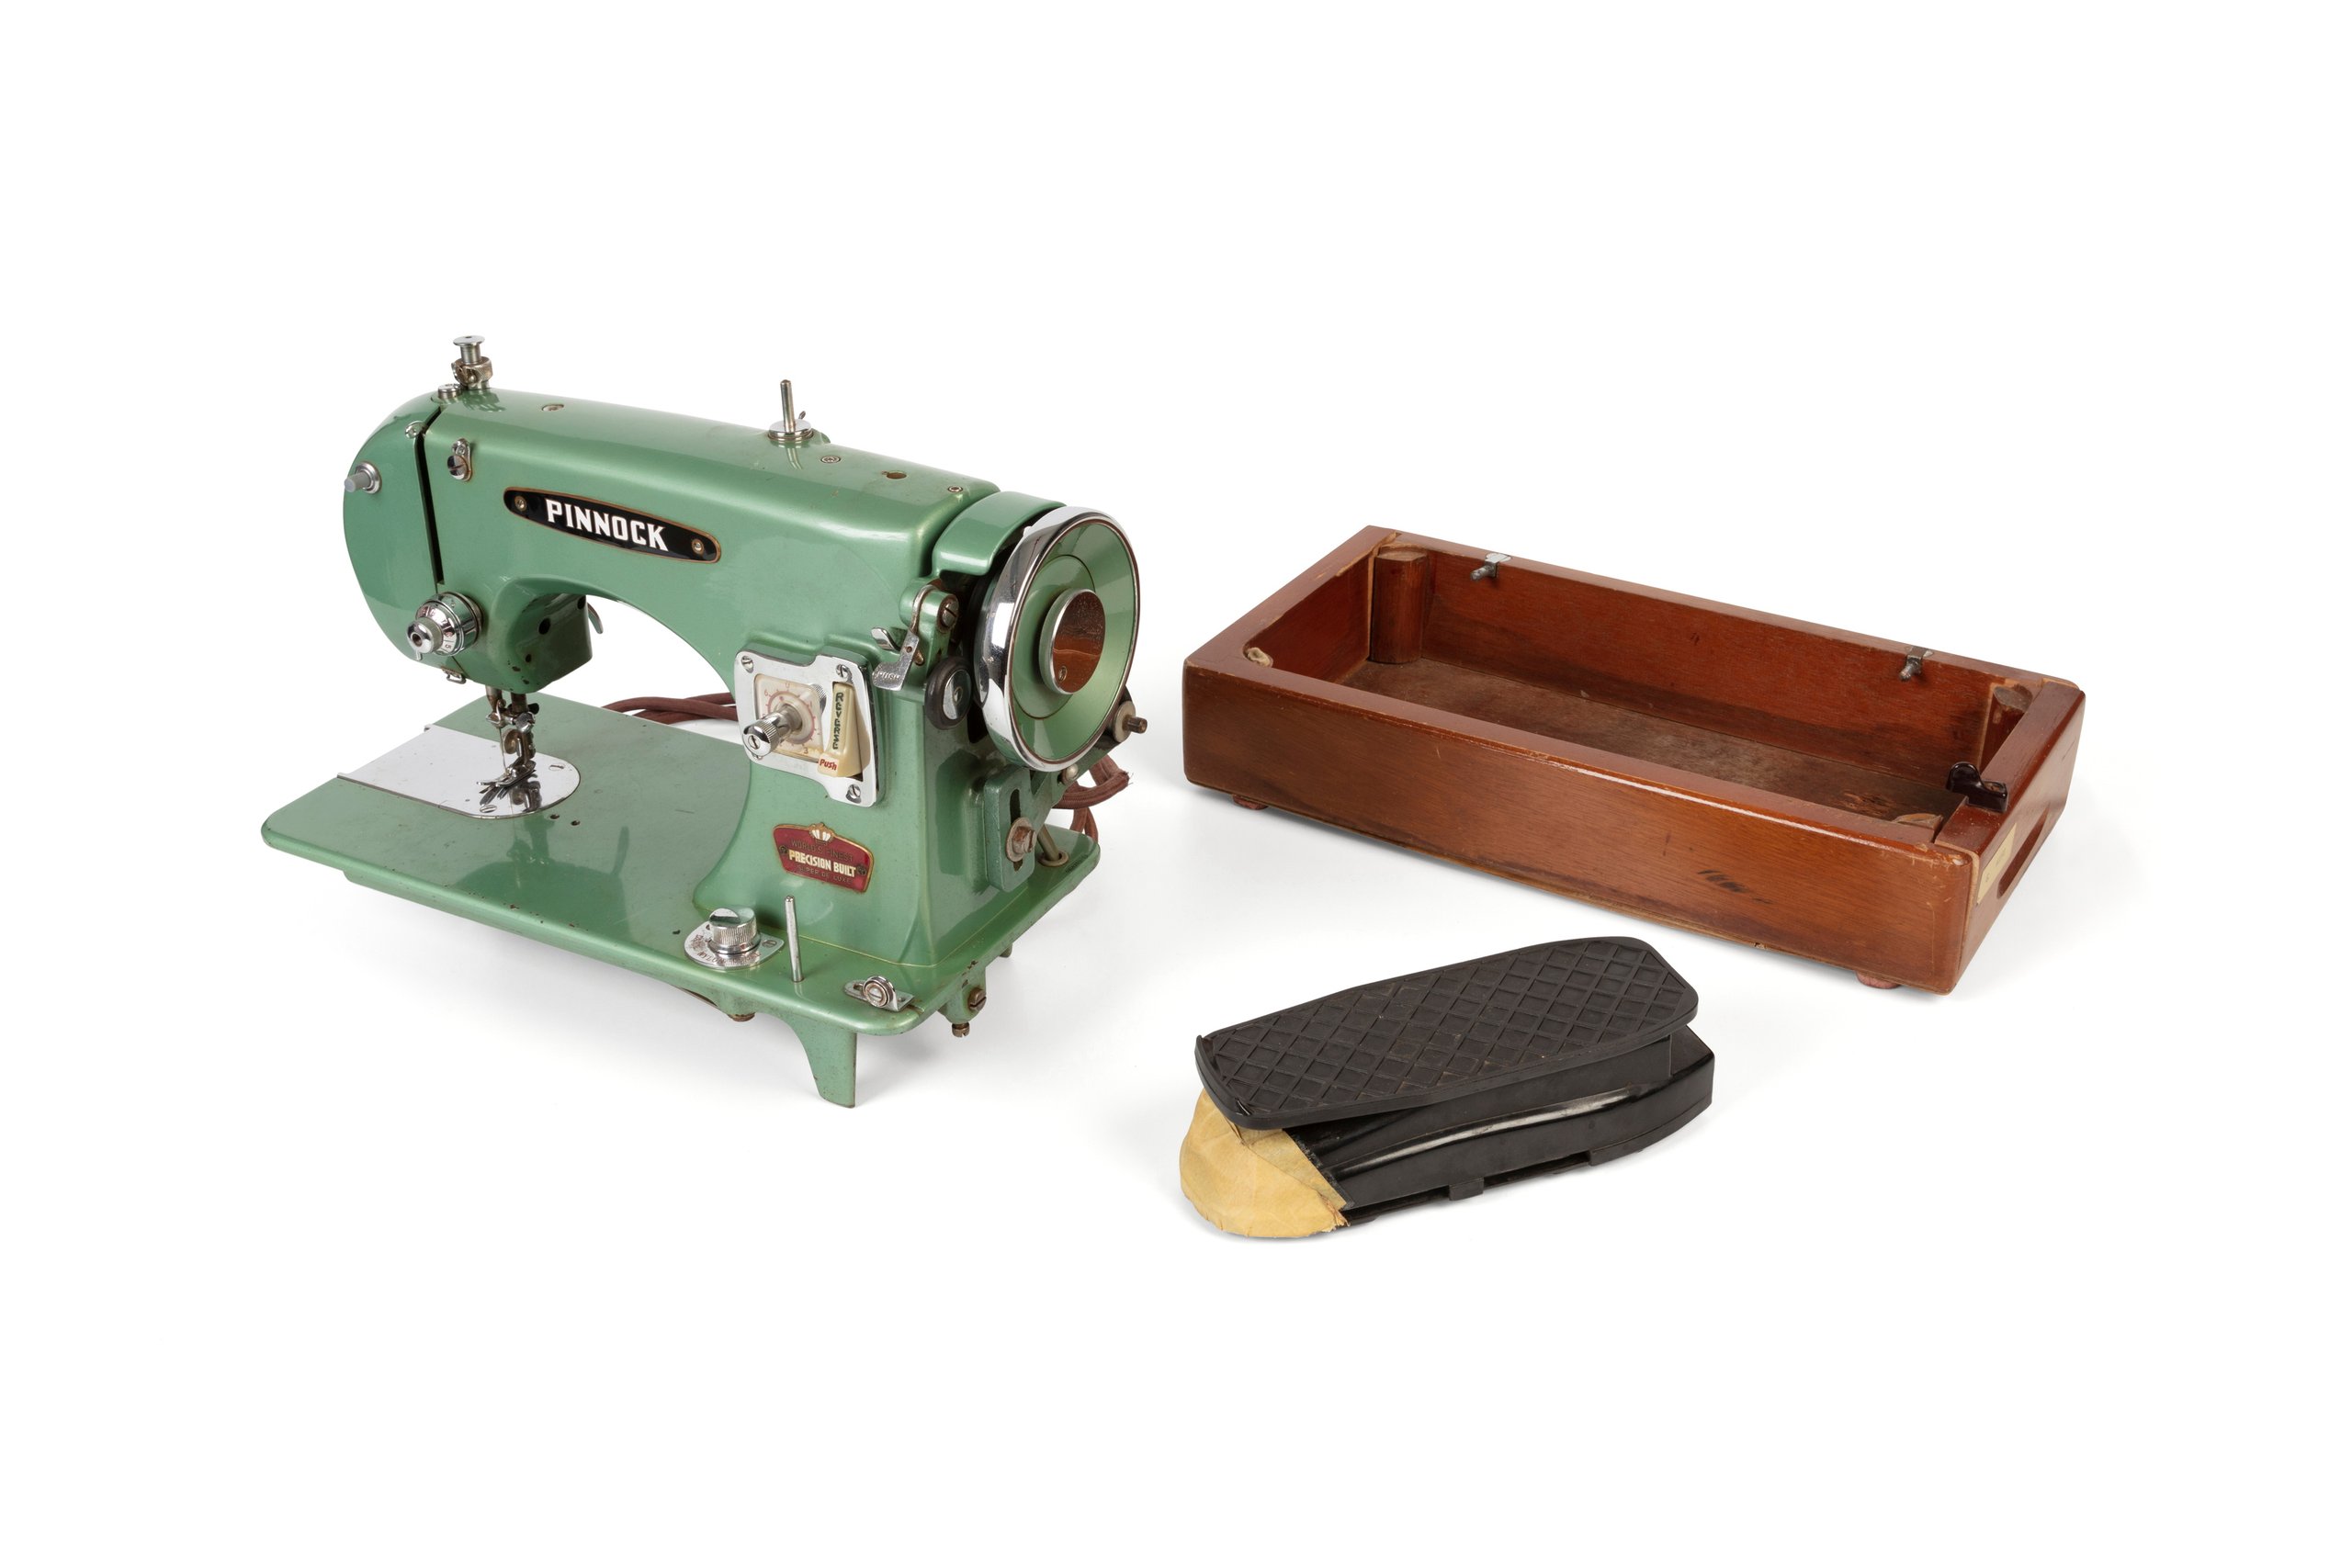 Powerhouse Collection - Sewing machine and accessories by Pinnock